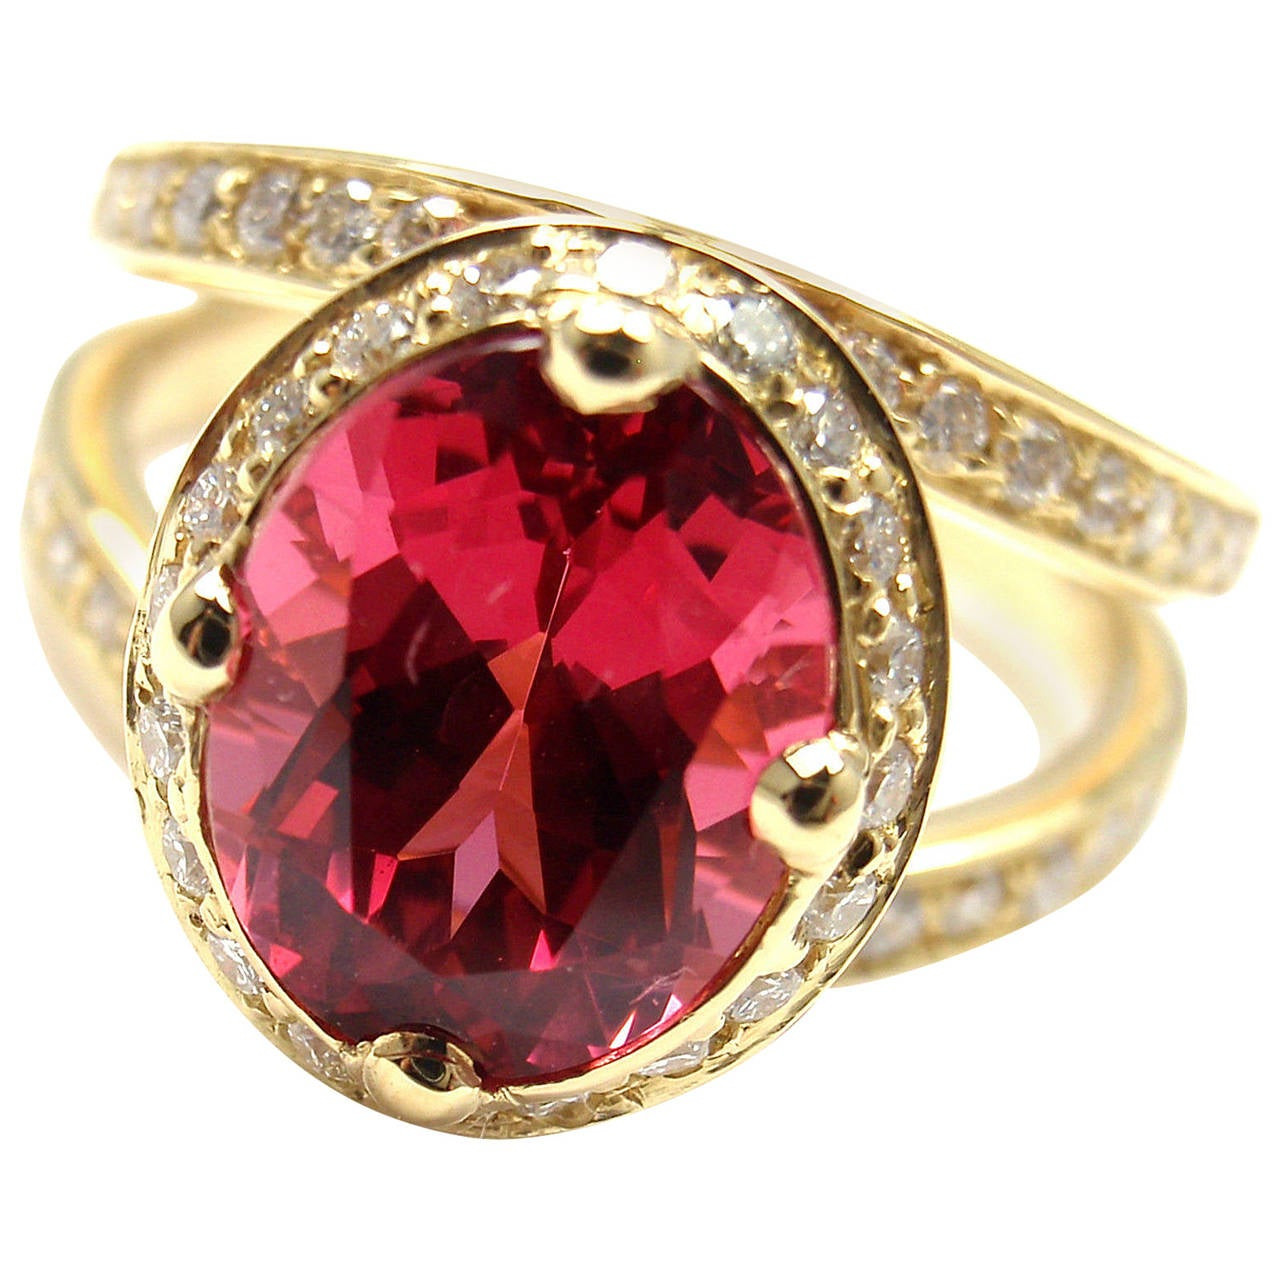 Diamond Rings For Sale
 Temple St Clair 2 89 Carat Red Spinel Diamond Gold